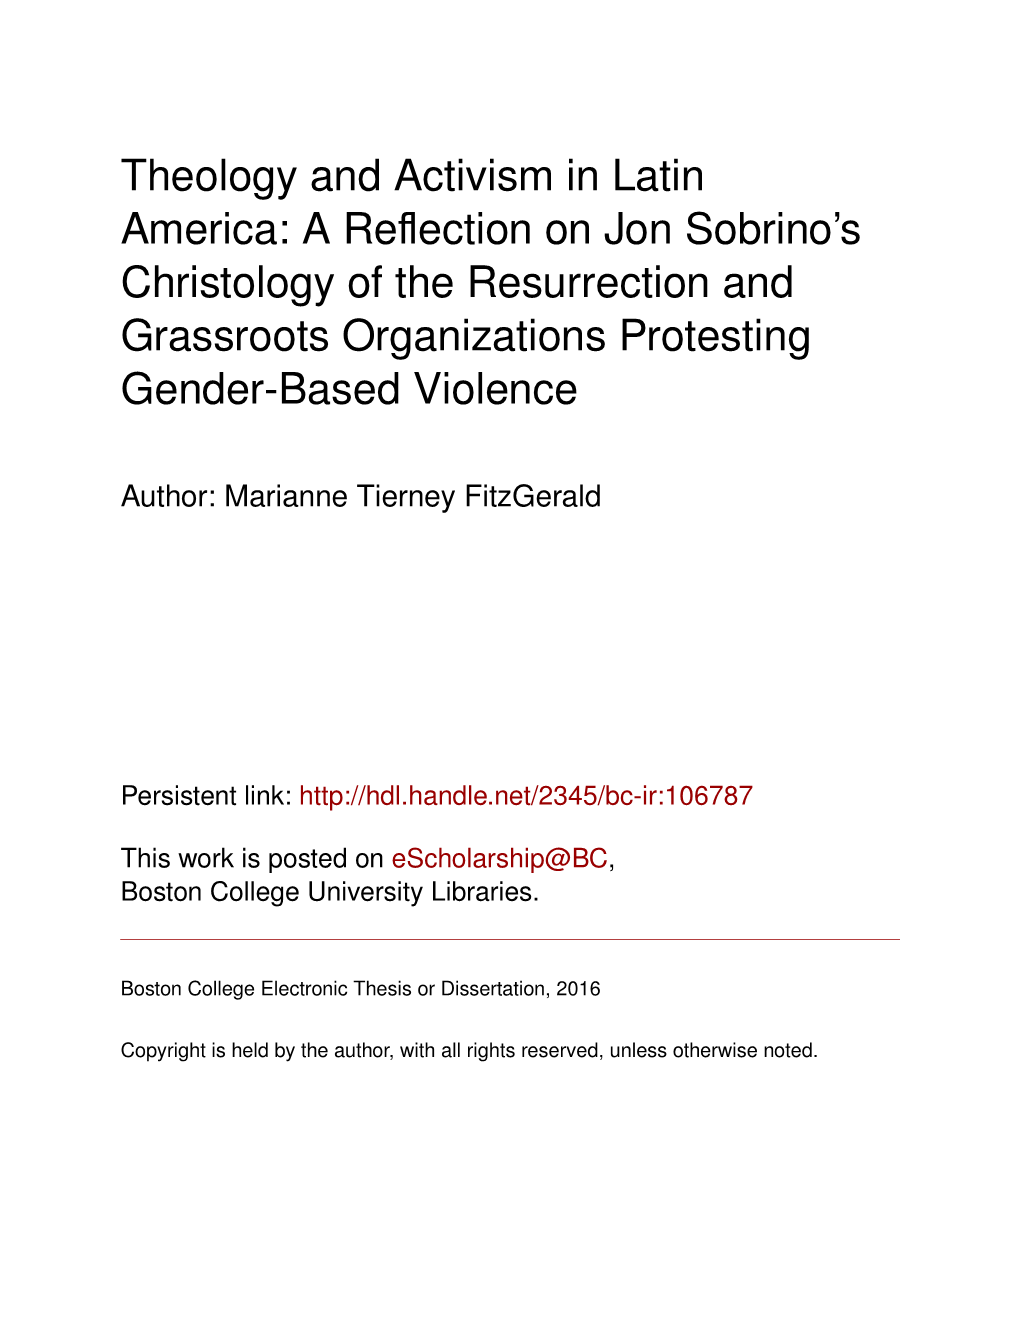 Theology and Activism in Latin America: a Reflection on Jon Sobrino's Christology of the Resurrection and Grassroots Organizat